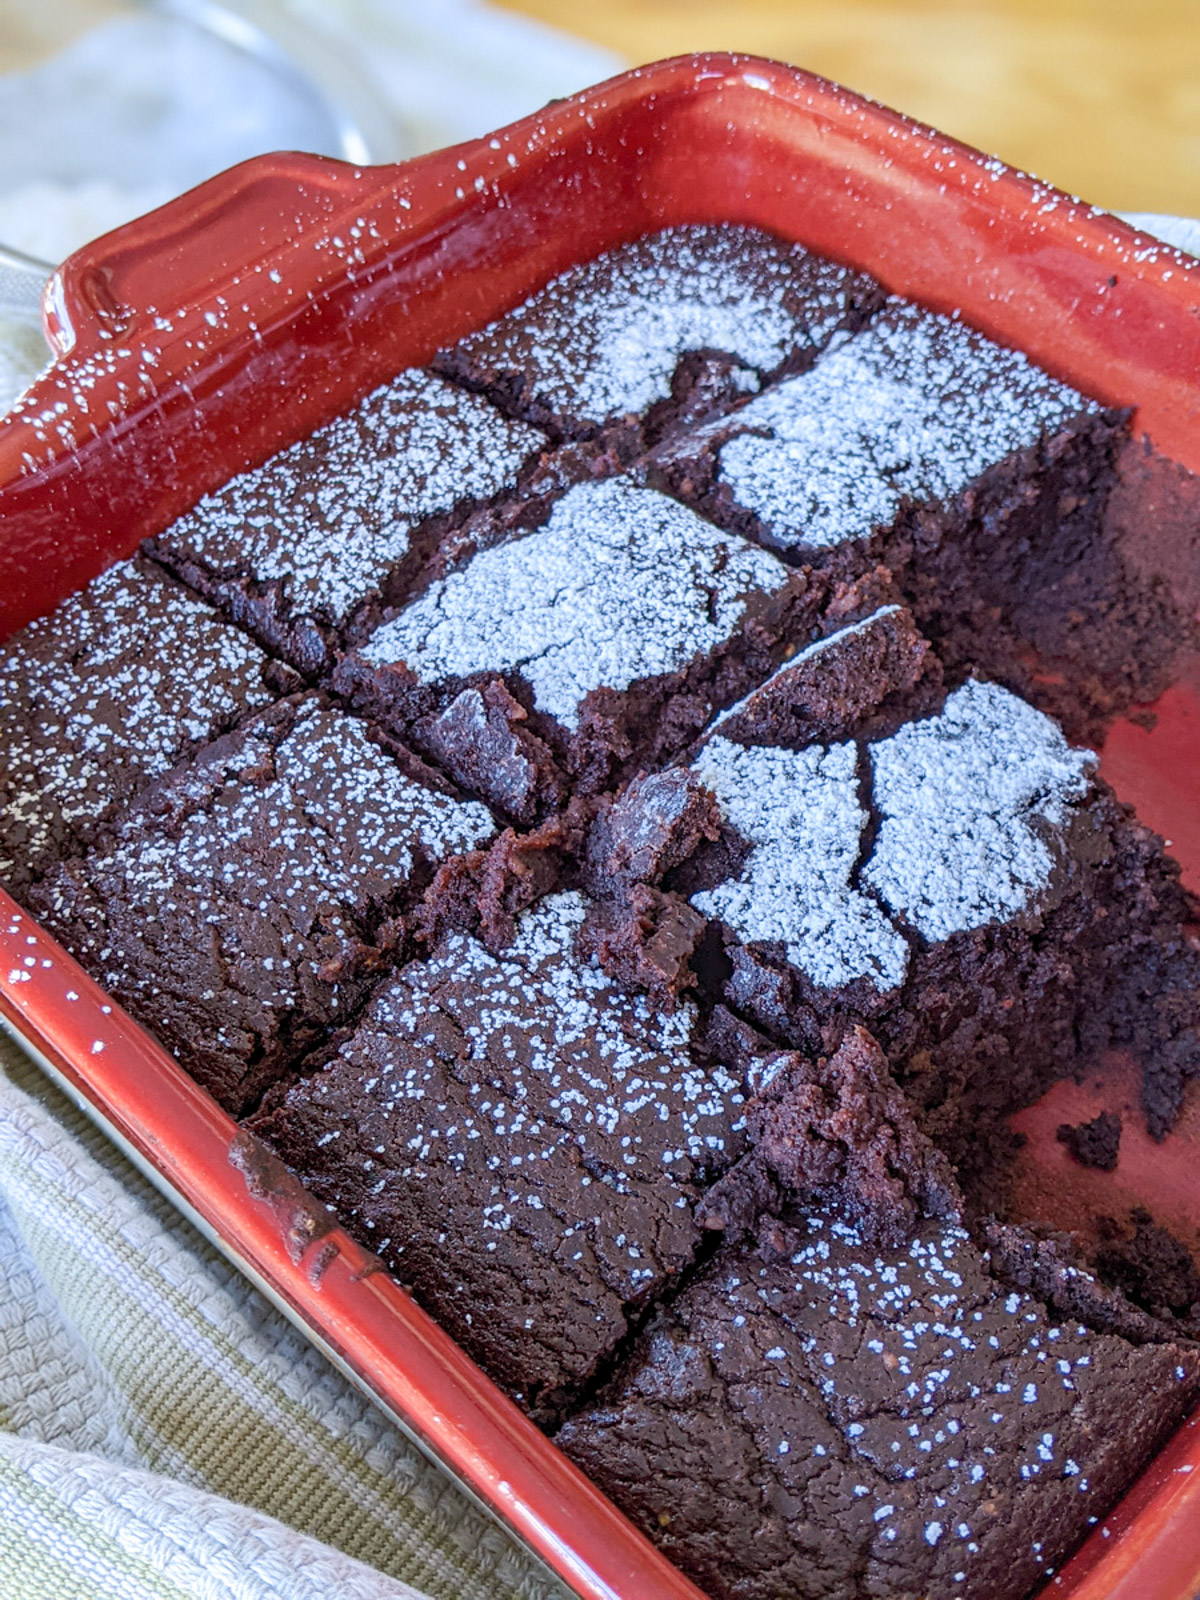 Protein brownies with black beans cut into squares in a red baking dish.